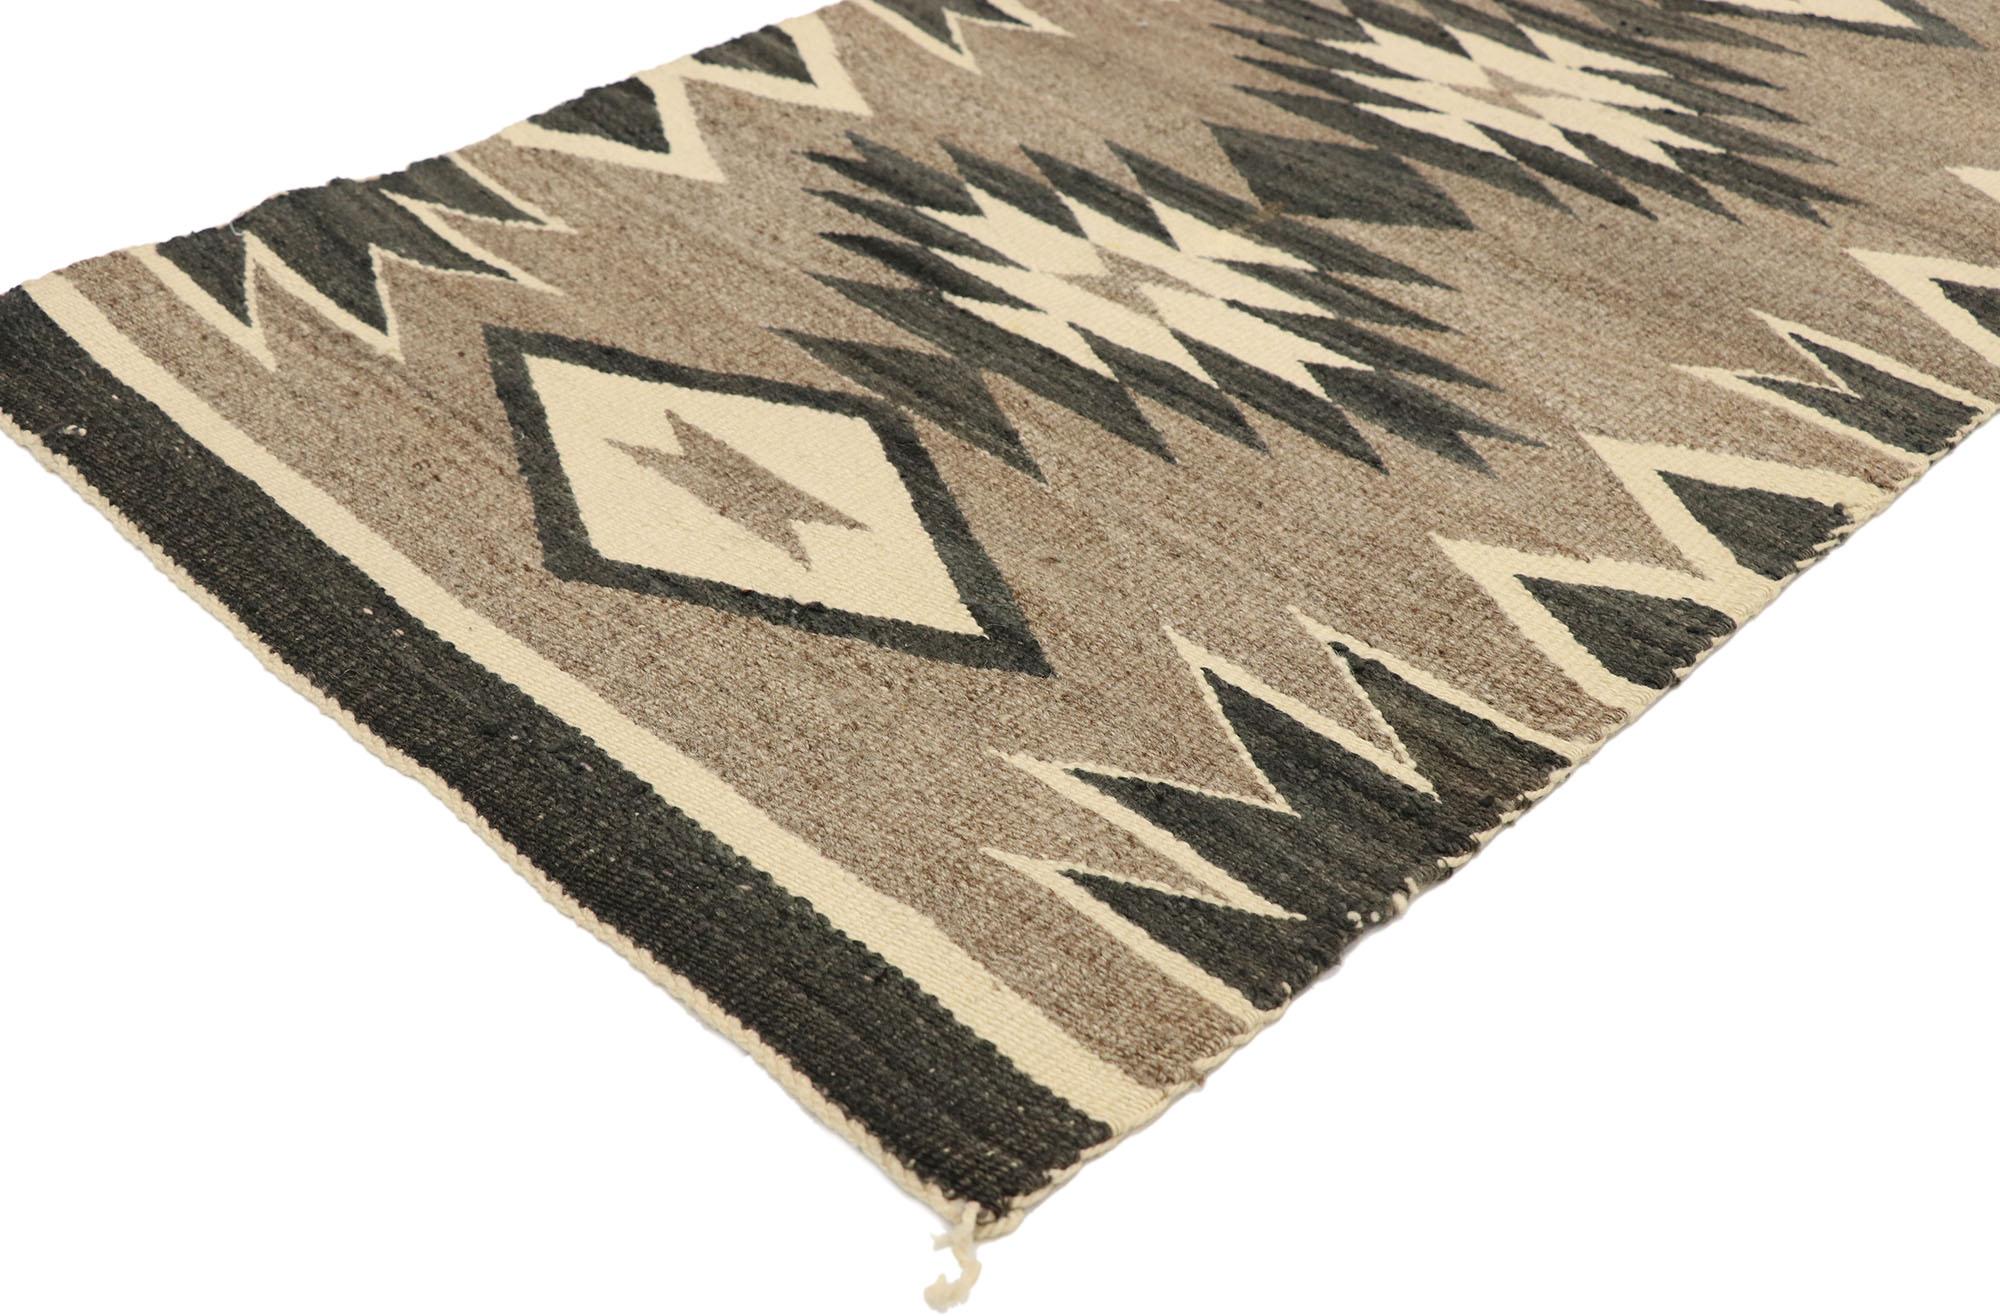 70677, Native American vintage Kilim rug with with Navajo Two Grey Hills style. Captivating and emanating Navajo vibes and Adirondack Lodge style, this handwoven wool vintage Native American Indian Kilim rug features two middle stars flanked with a